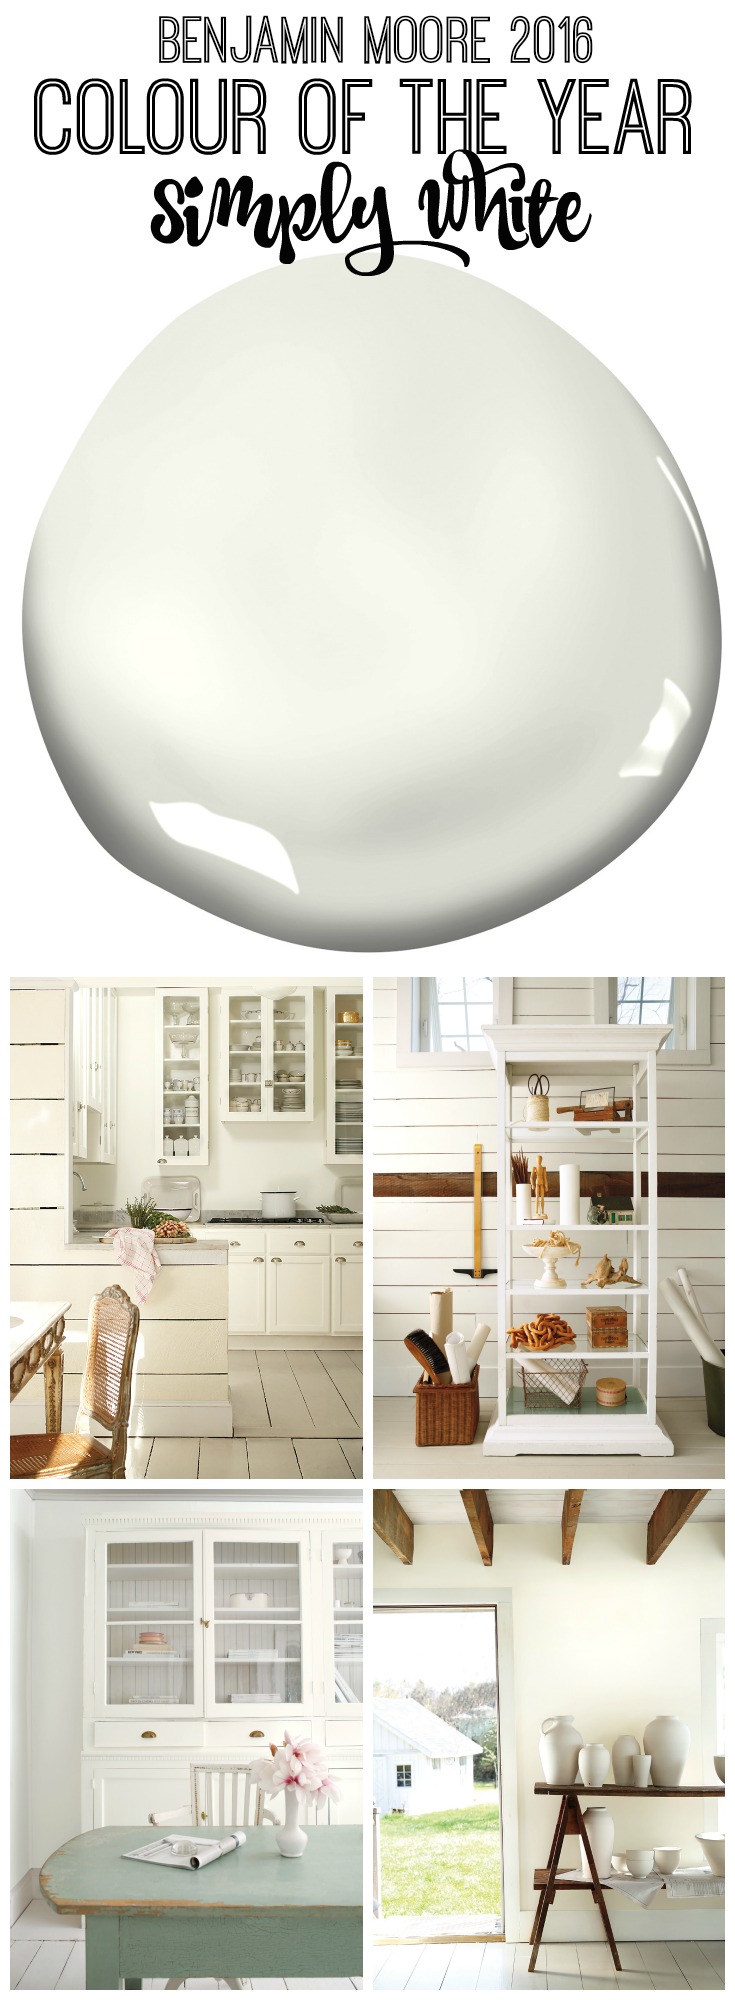 Benjamin Moore 2016 Colour of the Year Simply White inspiration at thehappyhousie.com